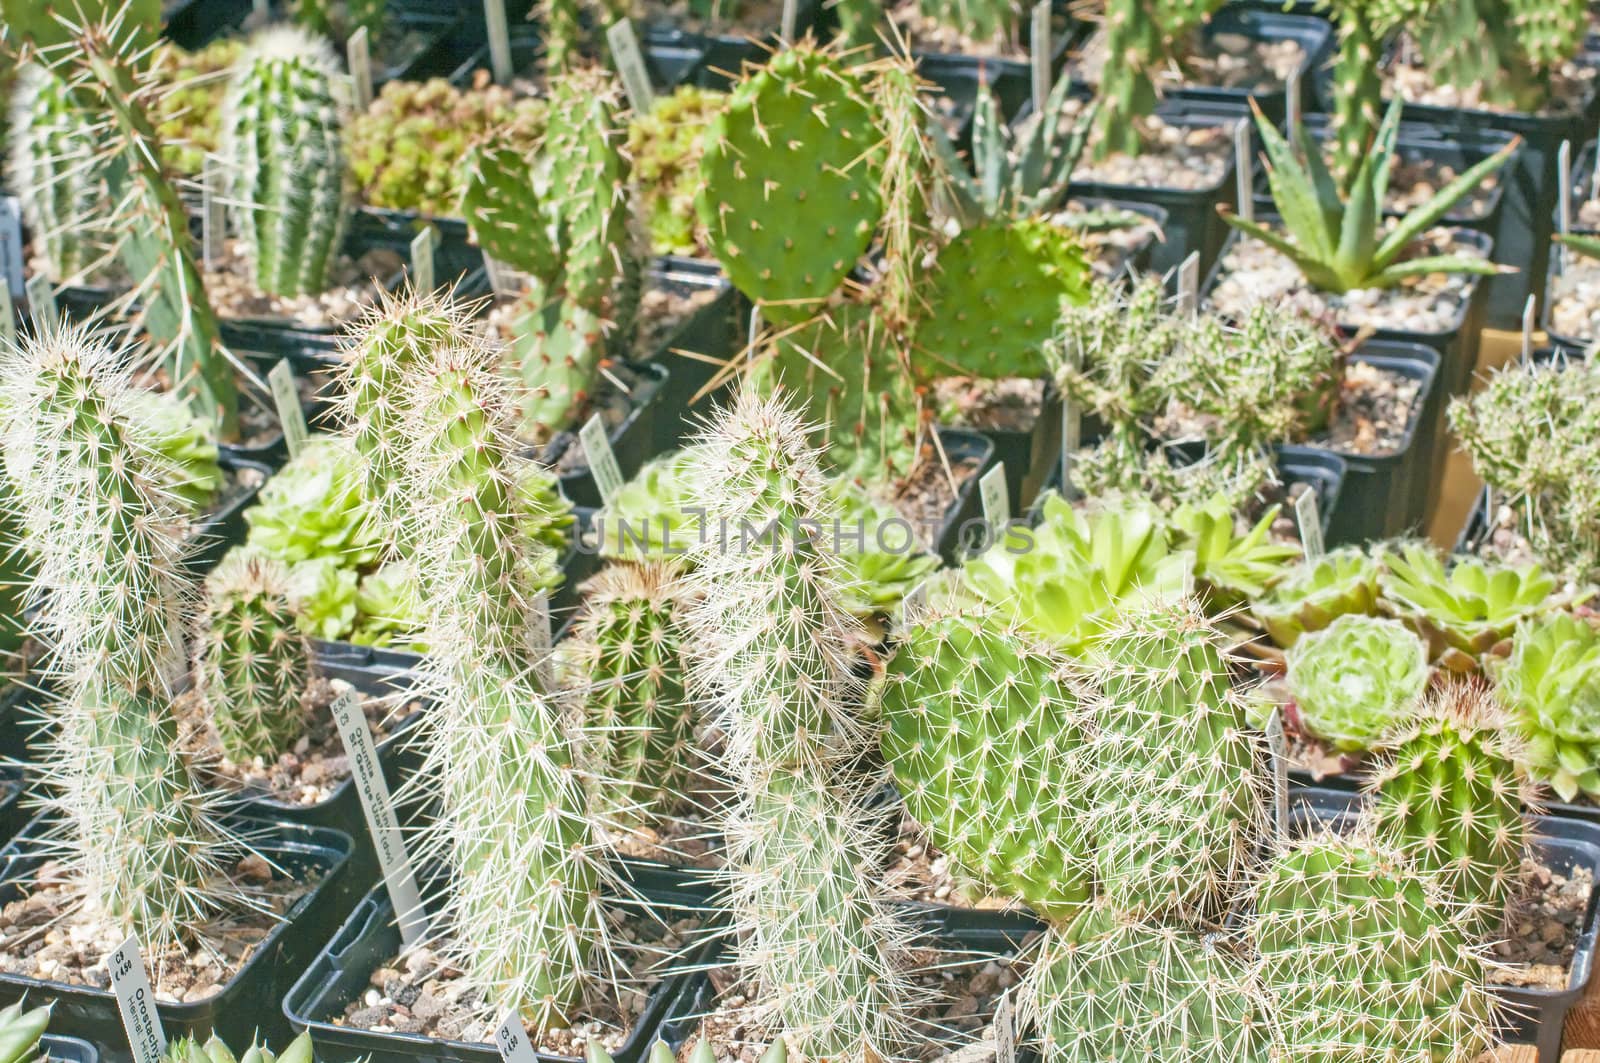 offer of cactus